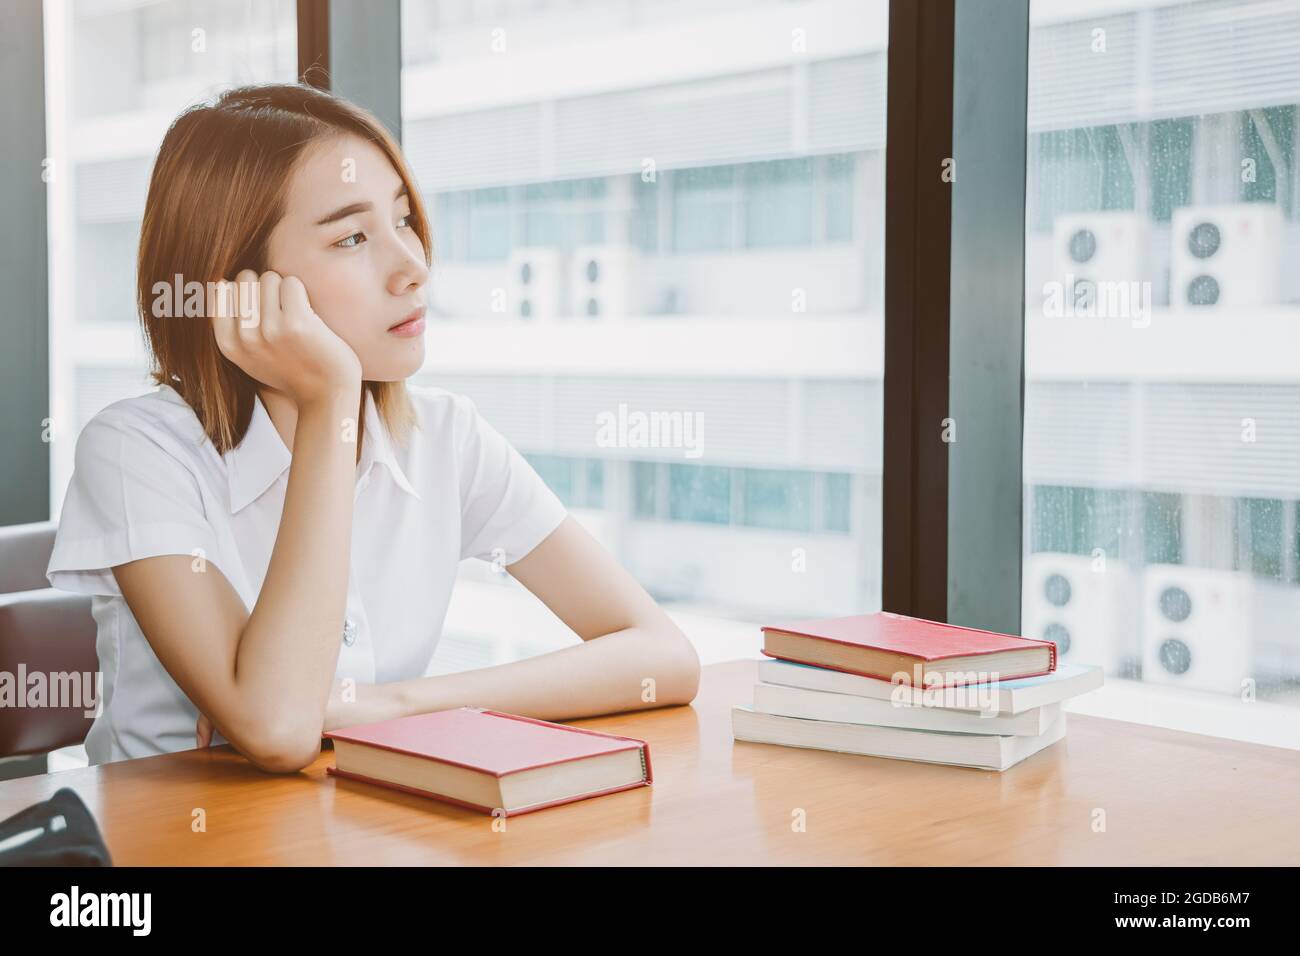 Asian university girl teen sitting alone thinking worry, day dreaming or boring looking out window lonely expression in library. Stock Photo